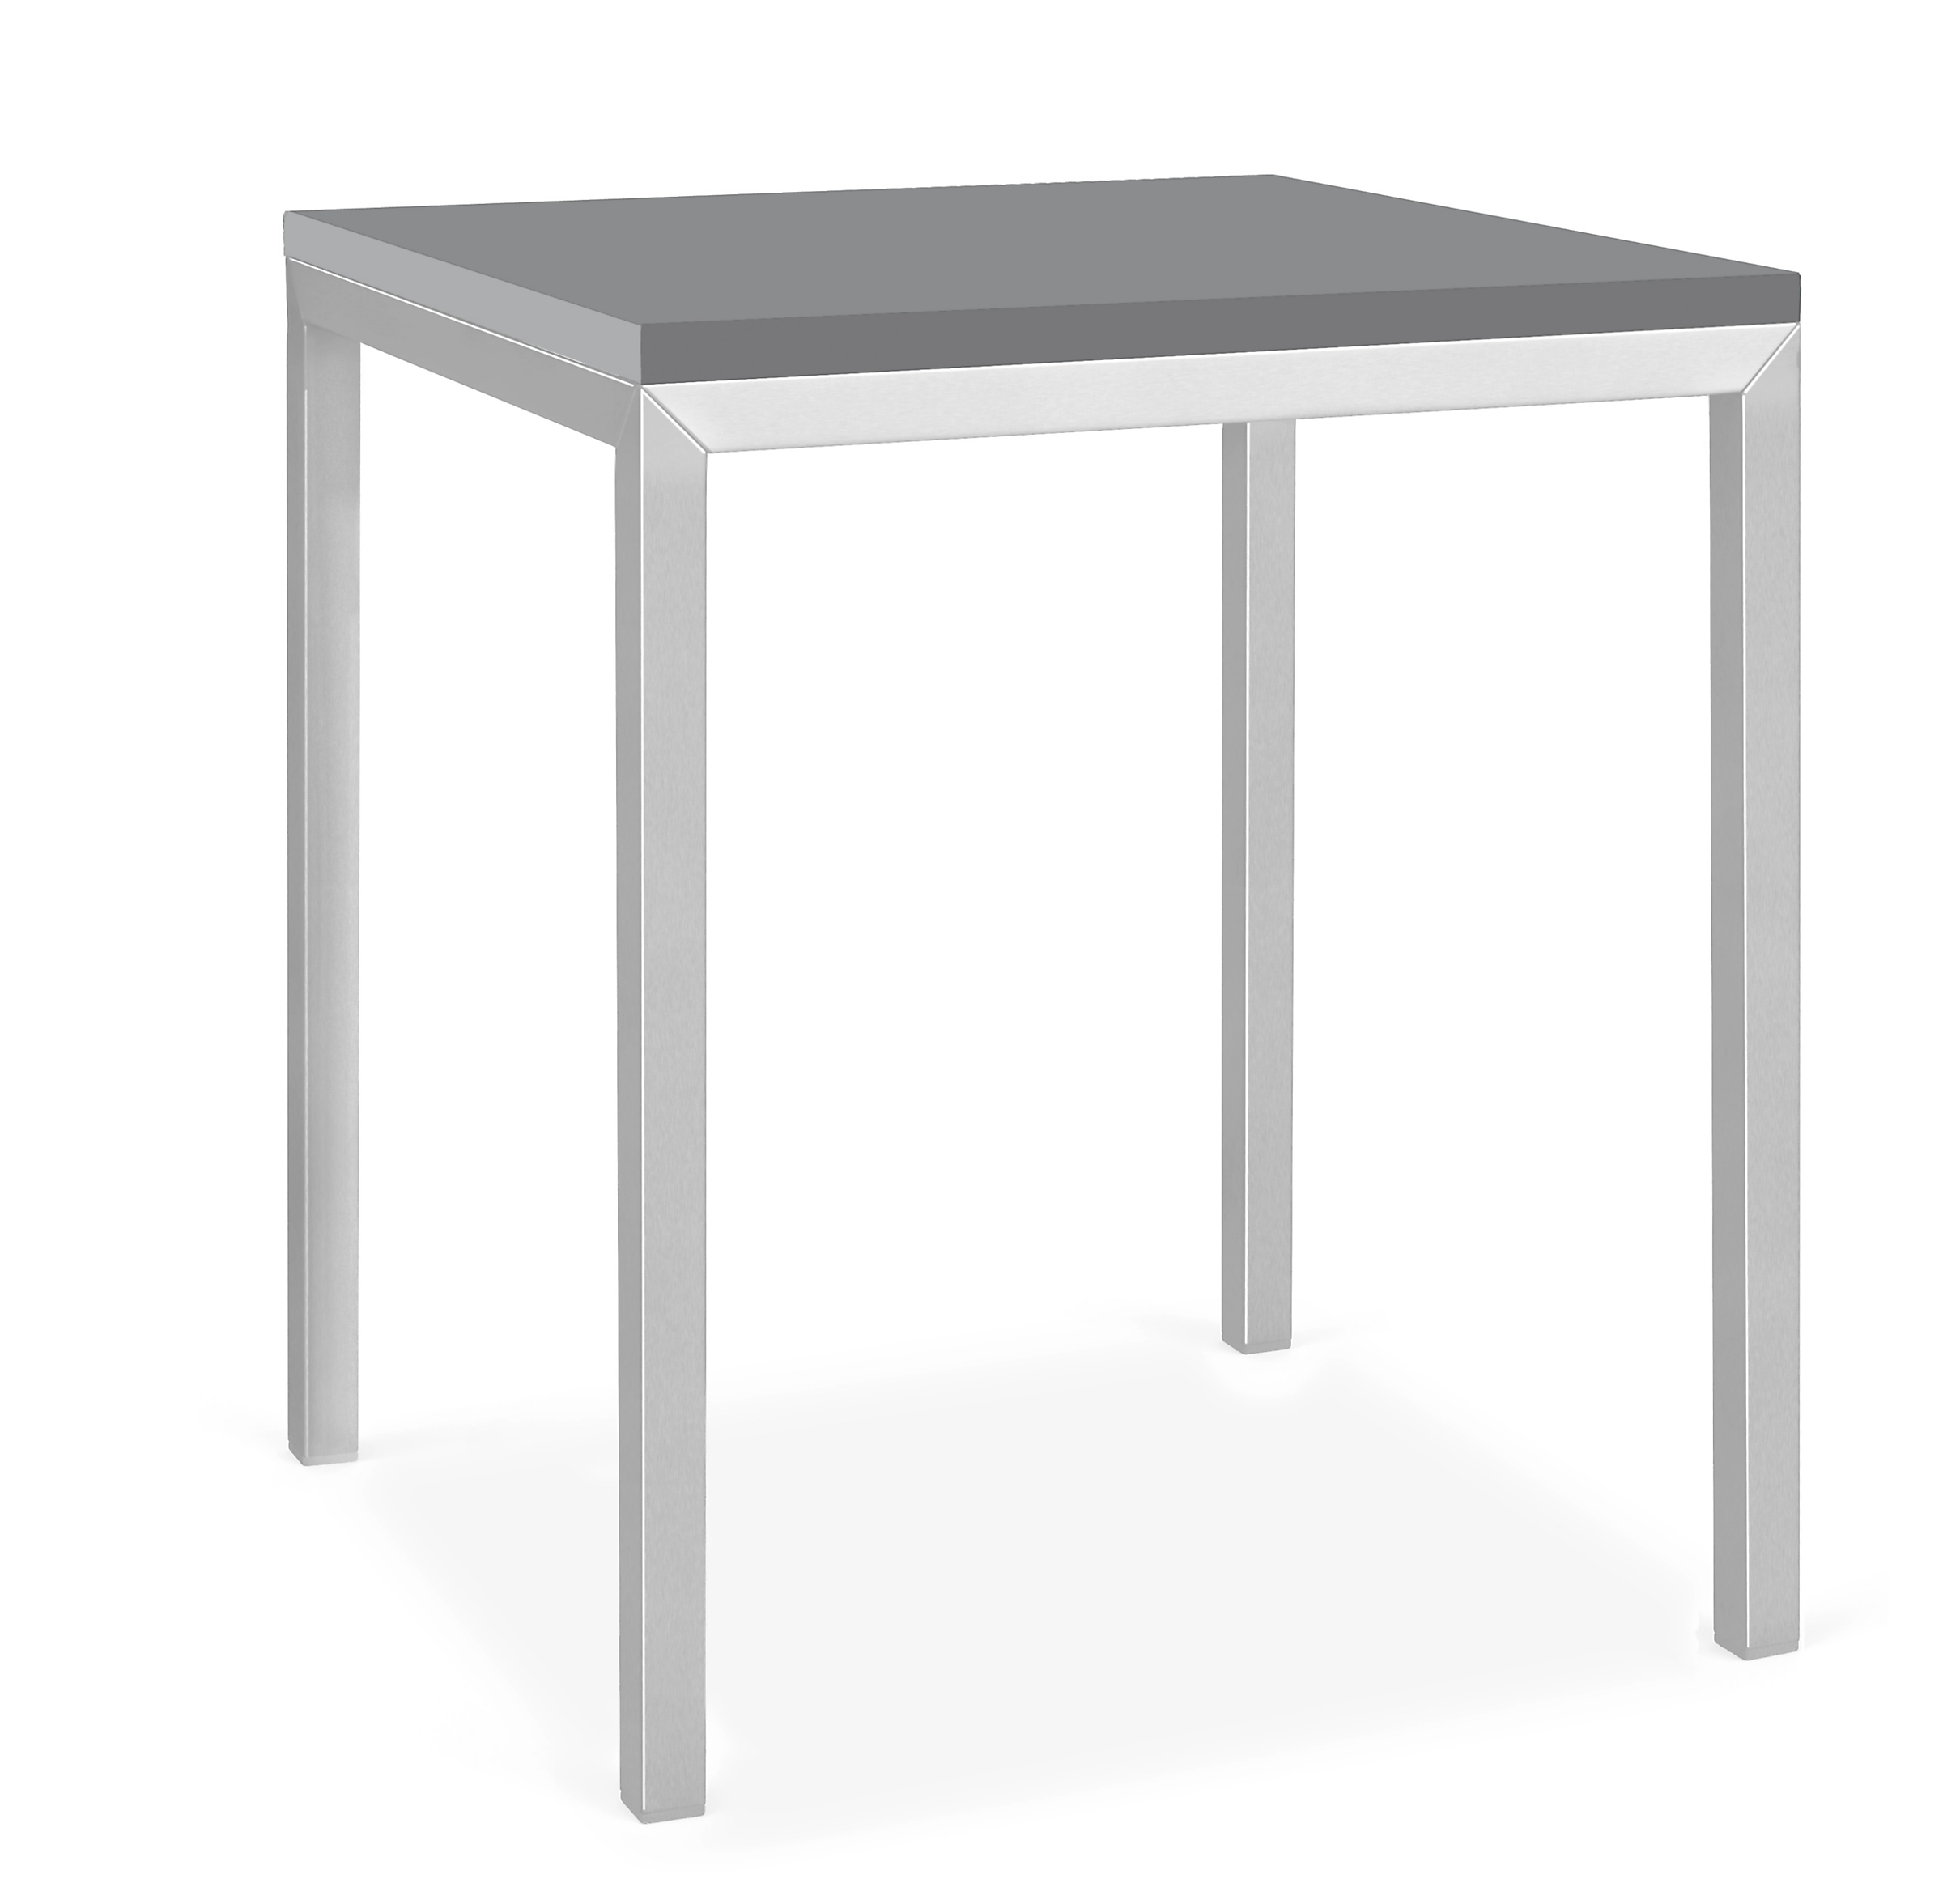 Parsons 30w 20d 24h Outdoor Side Table 1" Leg in SS w/Light Grey HDPE Top